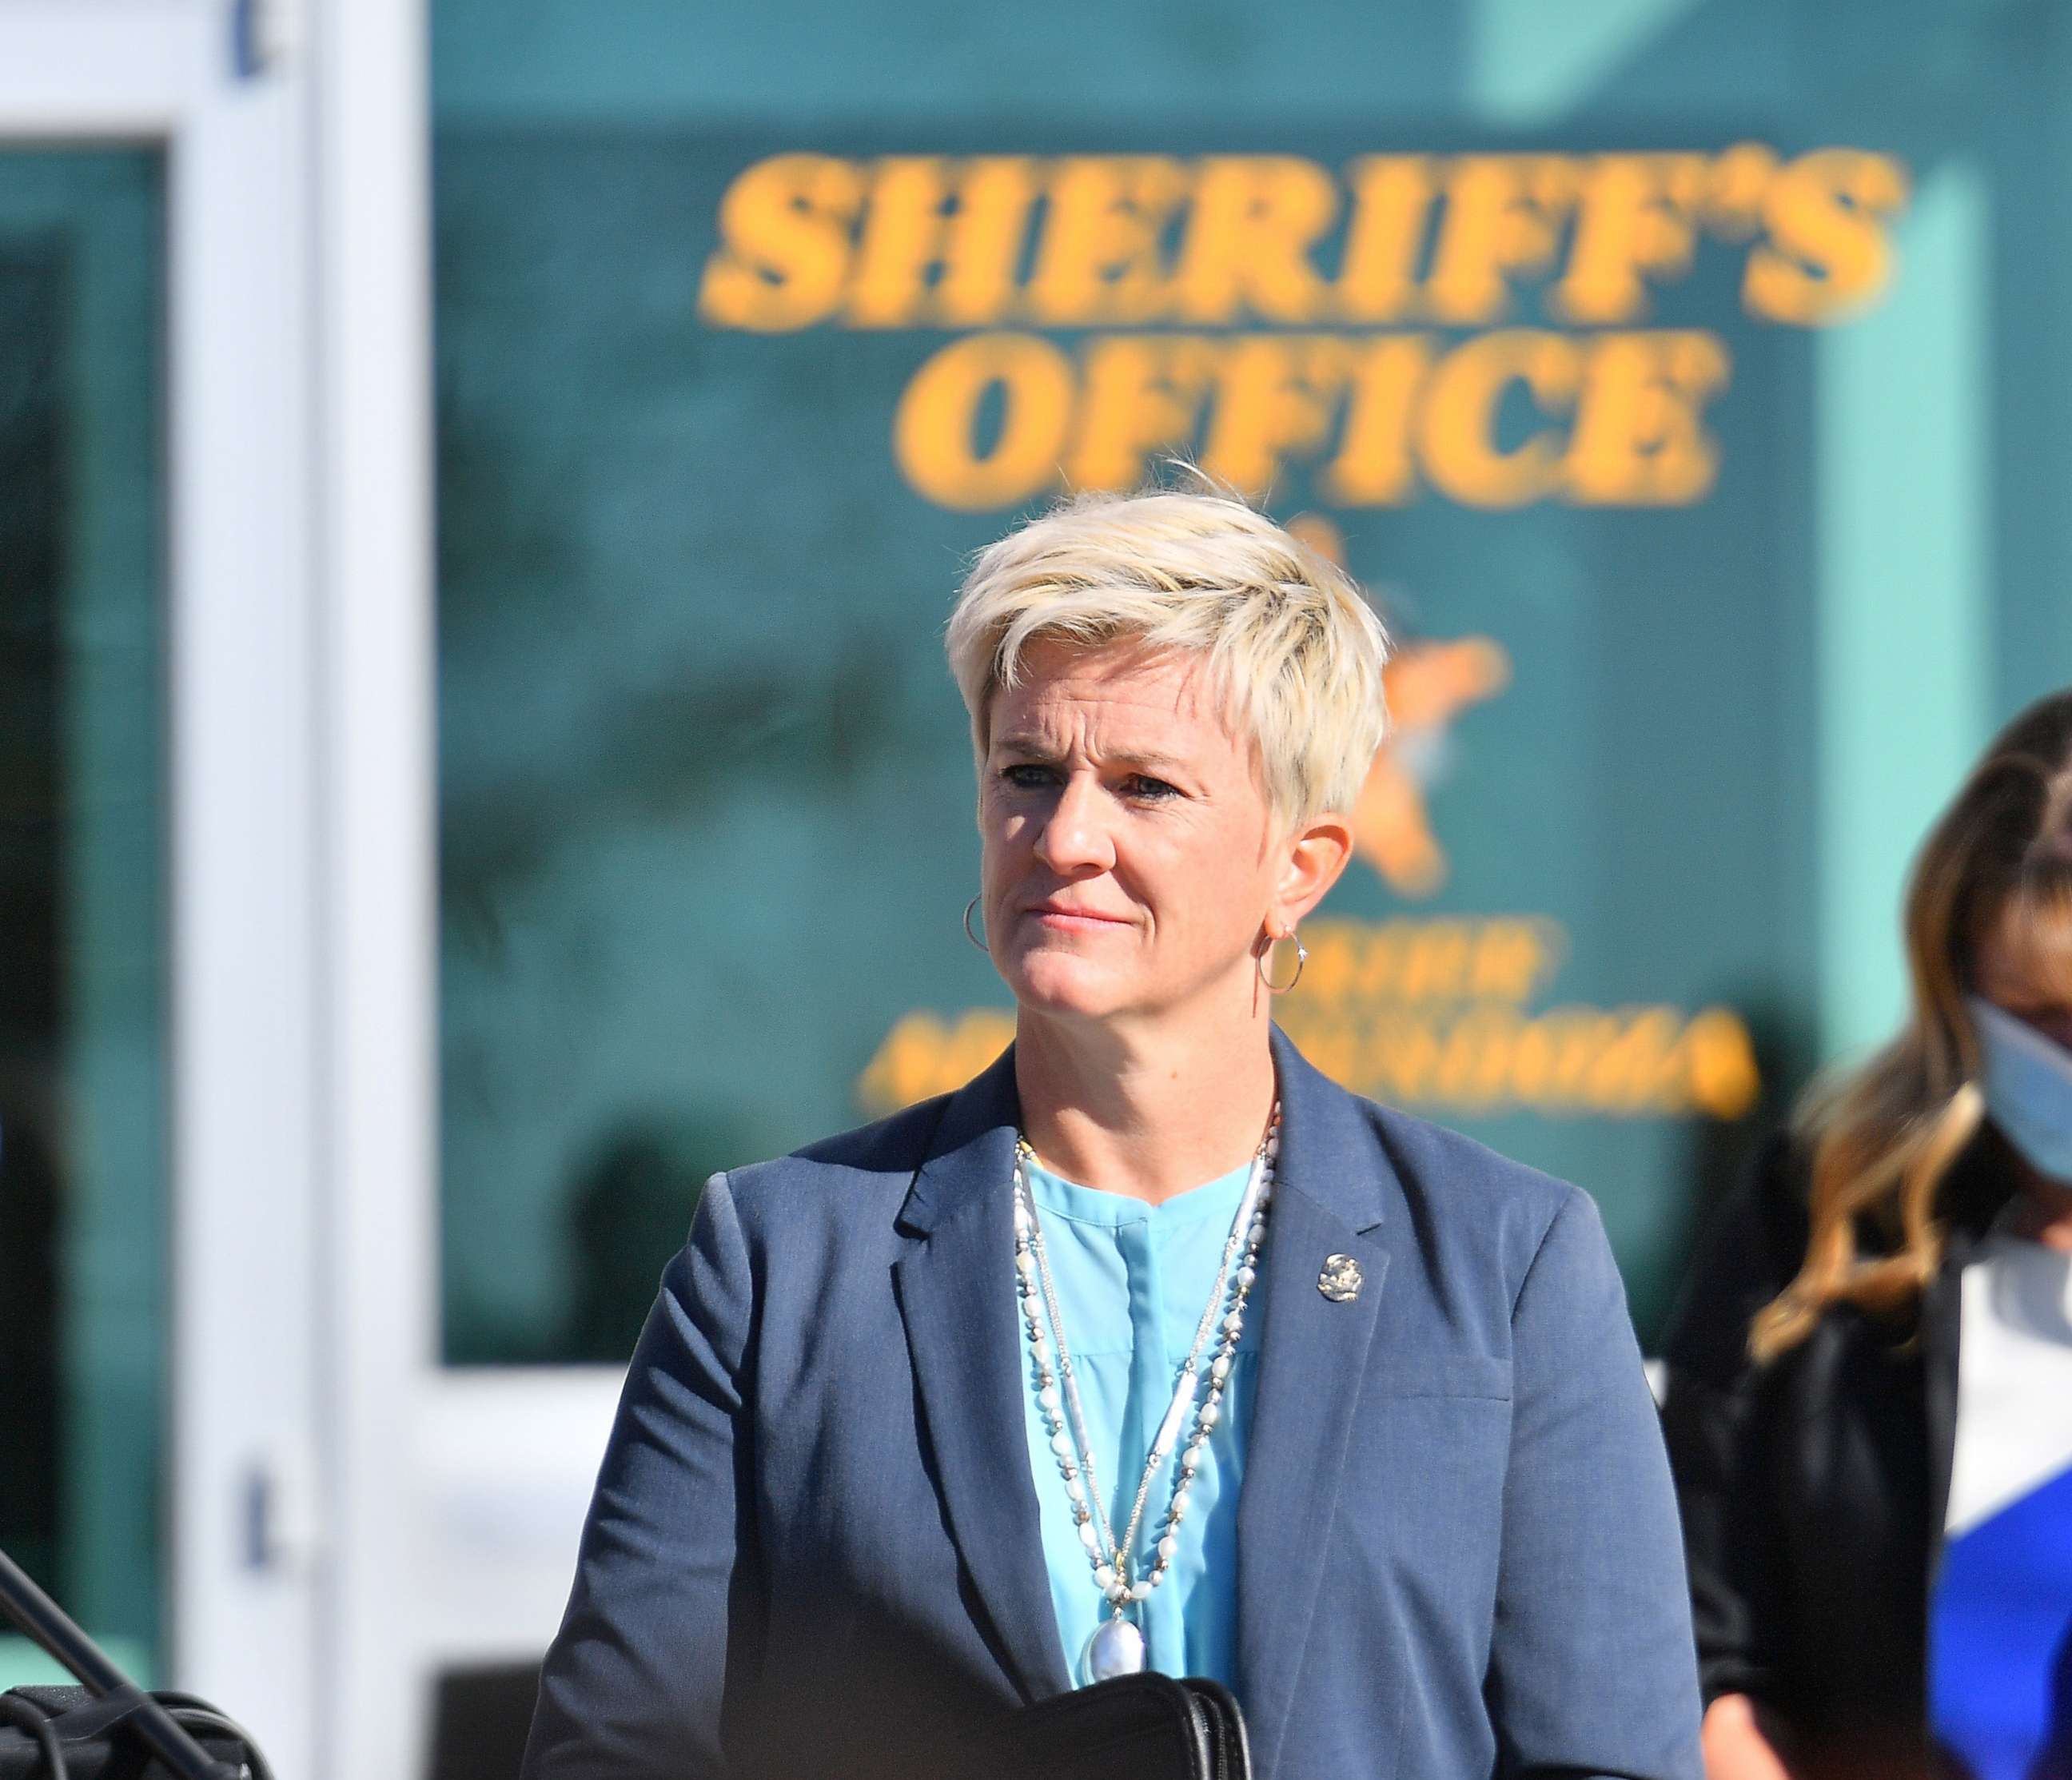 PHOTO: First Judicial District Attorney Mary Carmack-Altwies during a press conference at the Santa Fe County Public Safety Building on Oct. 27, 2021 in Santa Fe, New Mexico.